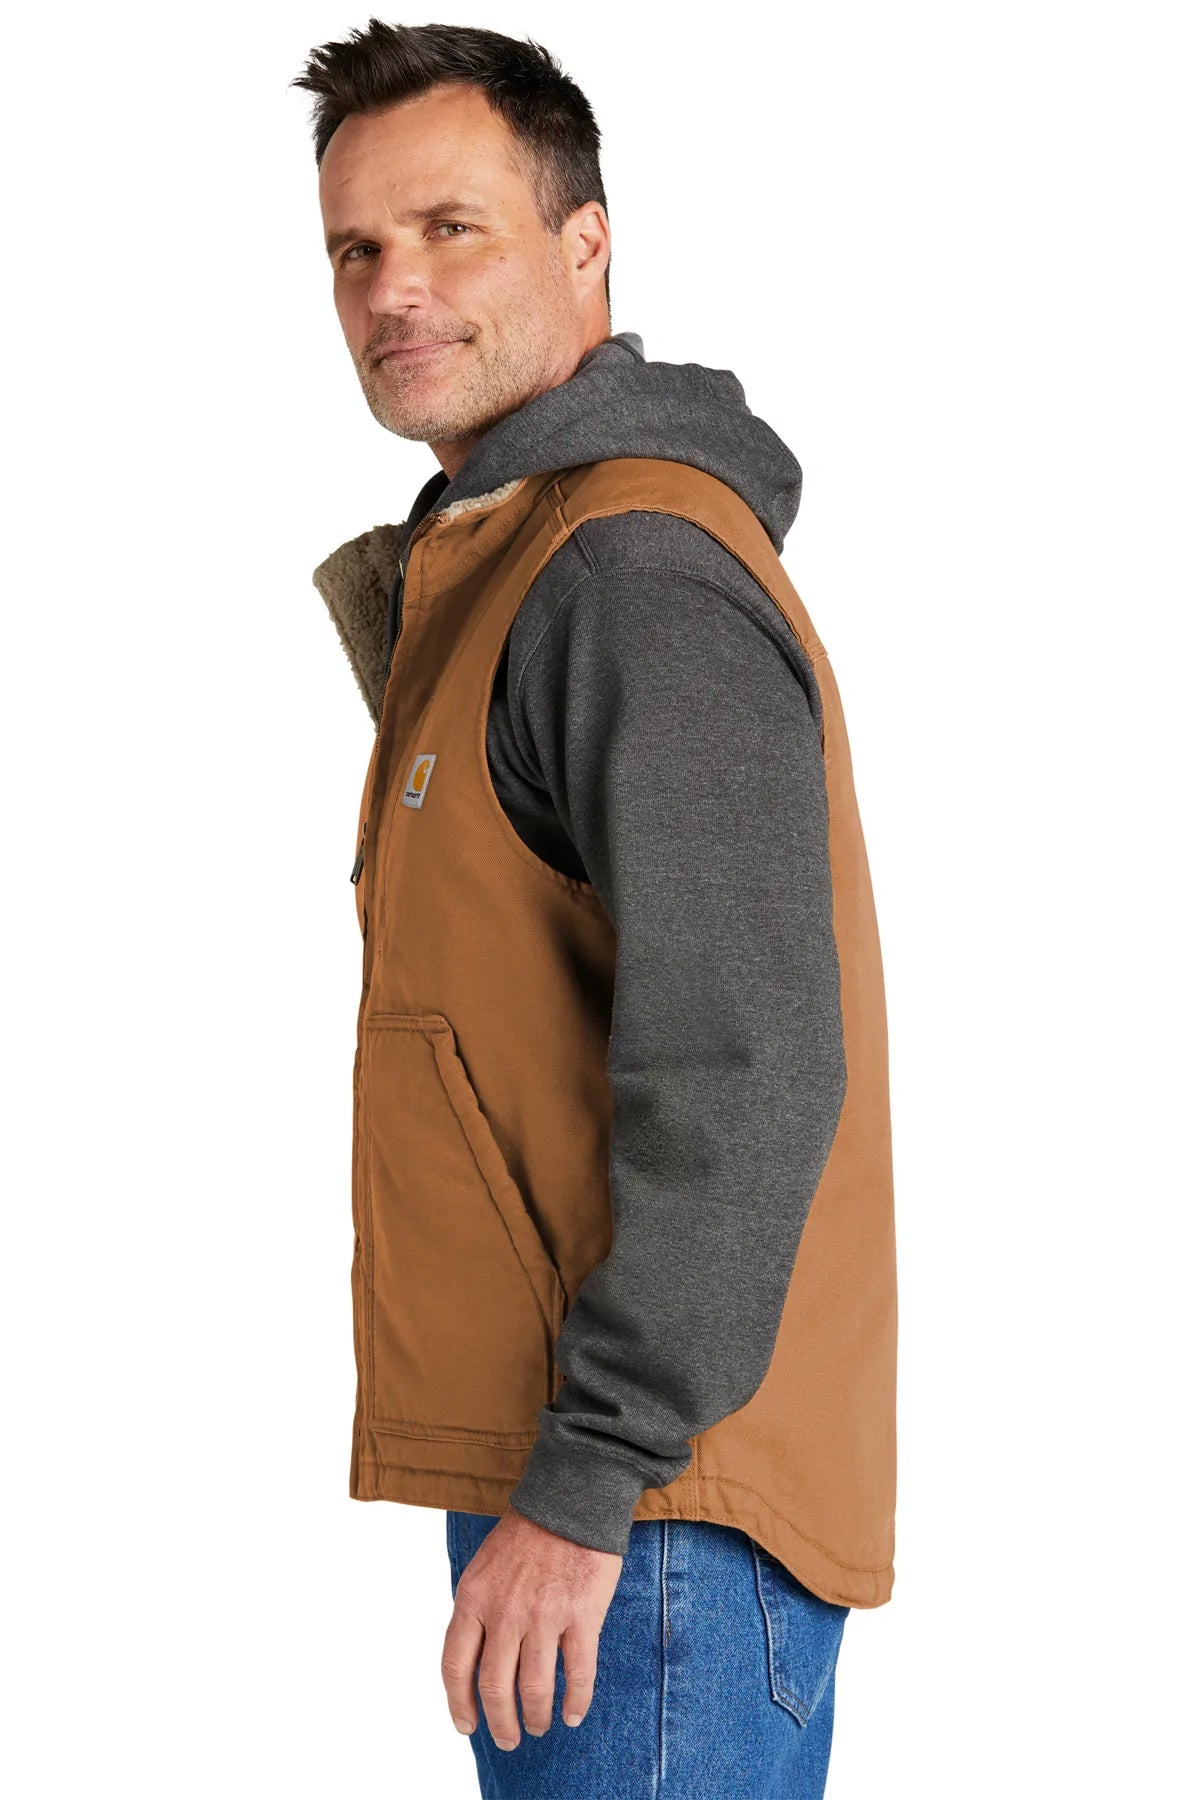 Carhartt Sherpa-Lined Customized Vests, Carhartt Brown